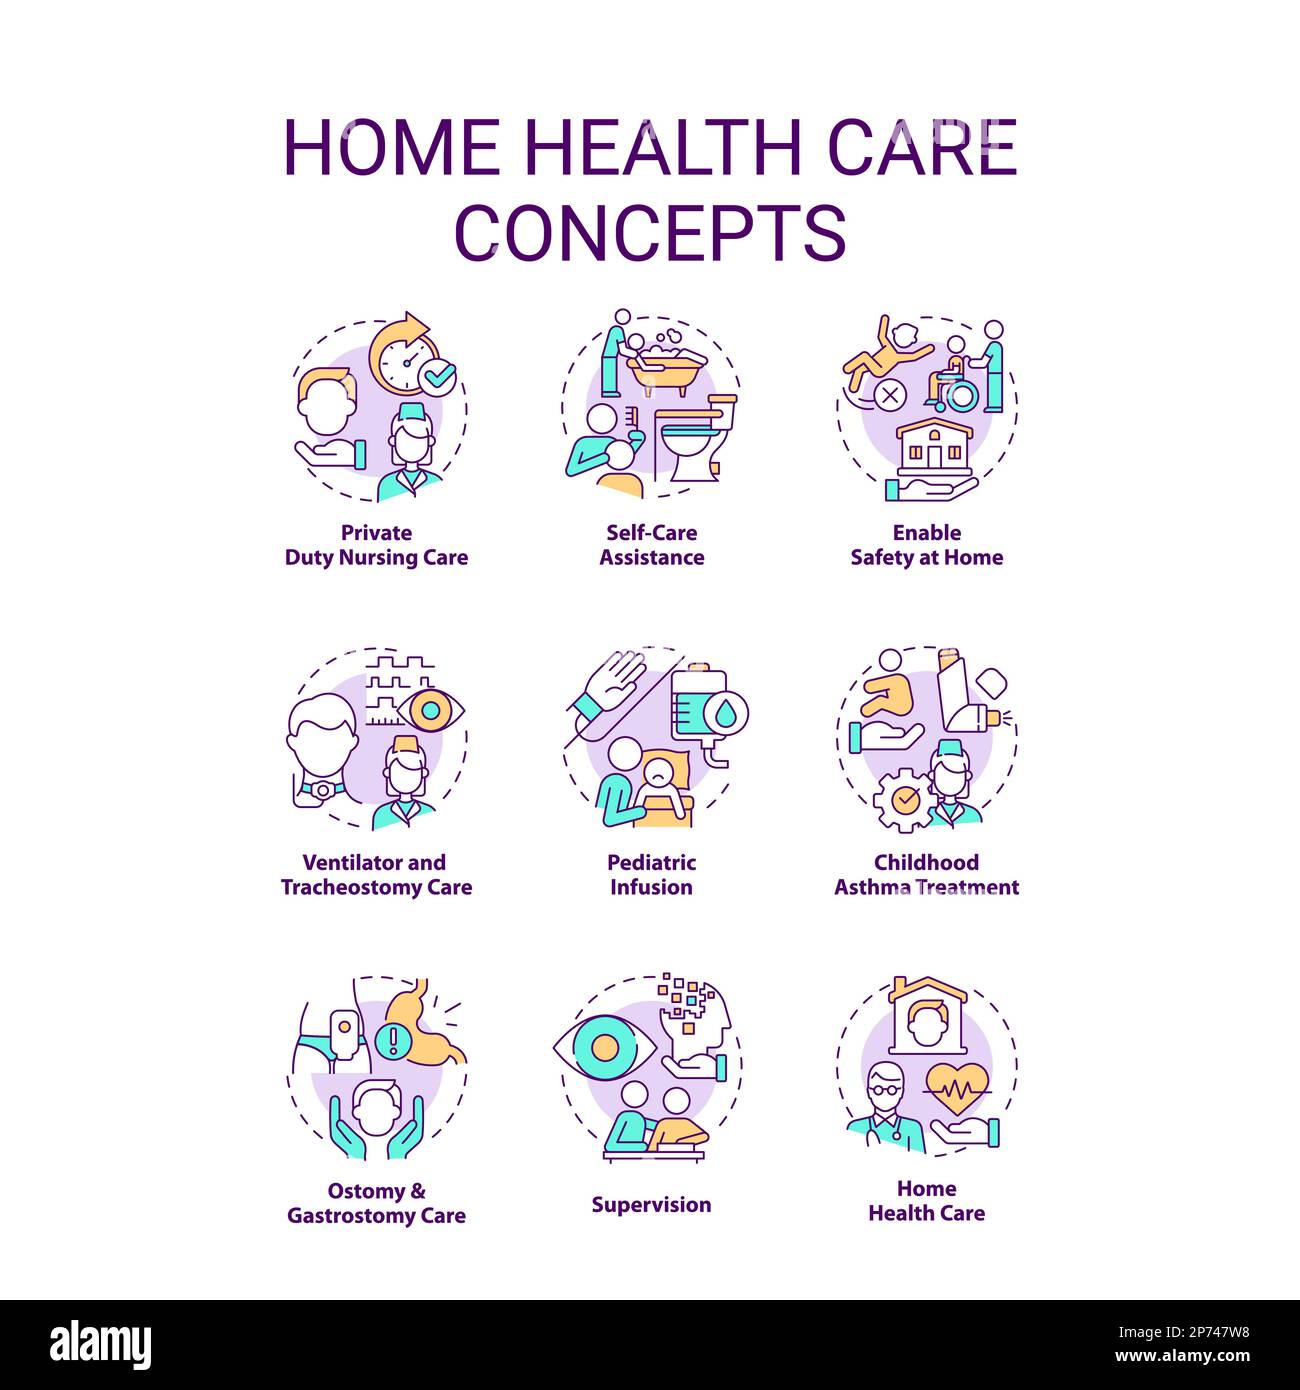 Home health care concept icons set Stock Vector